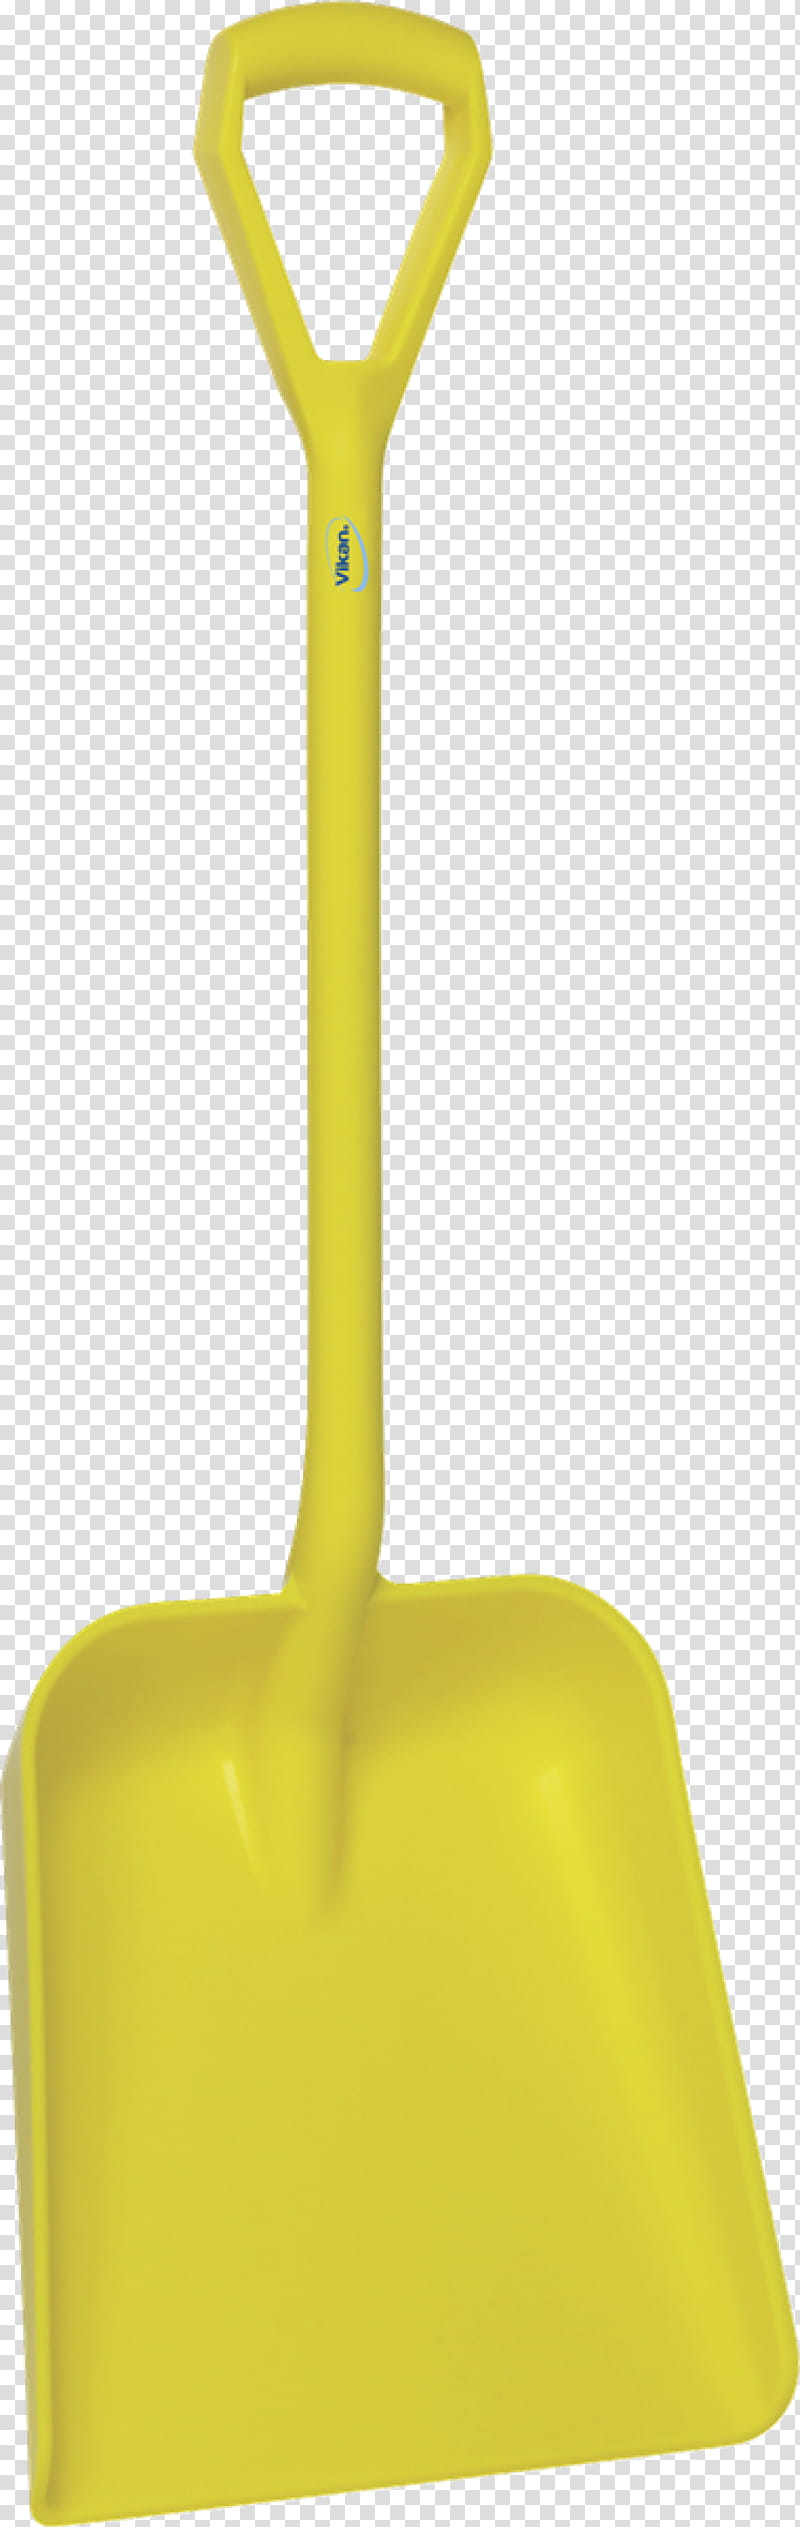 Online Shopping, Household Cleaning Supply, Yellow, Shovel, Millimeter, Saint Petersburg, Price, Wholesale transparent background PNG clipart